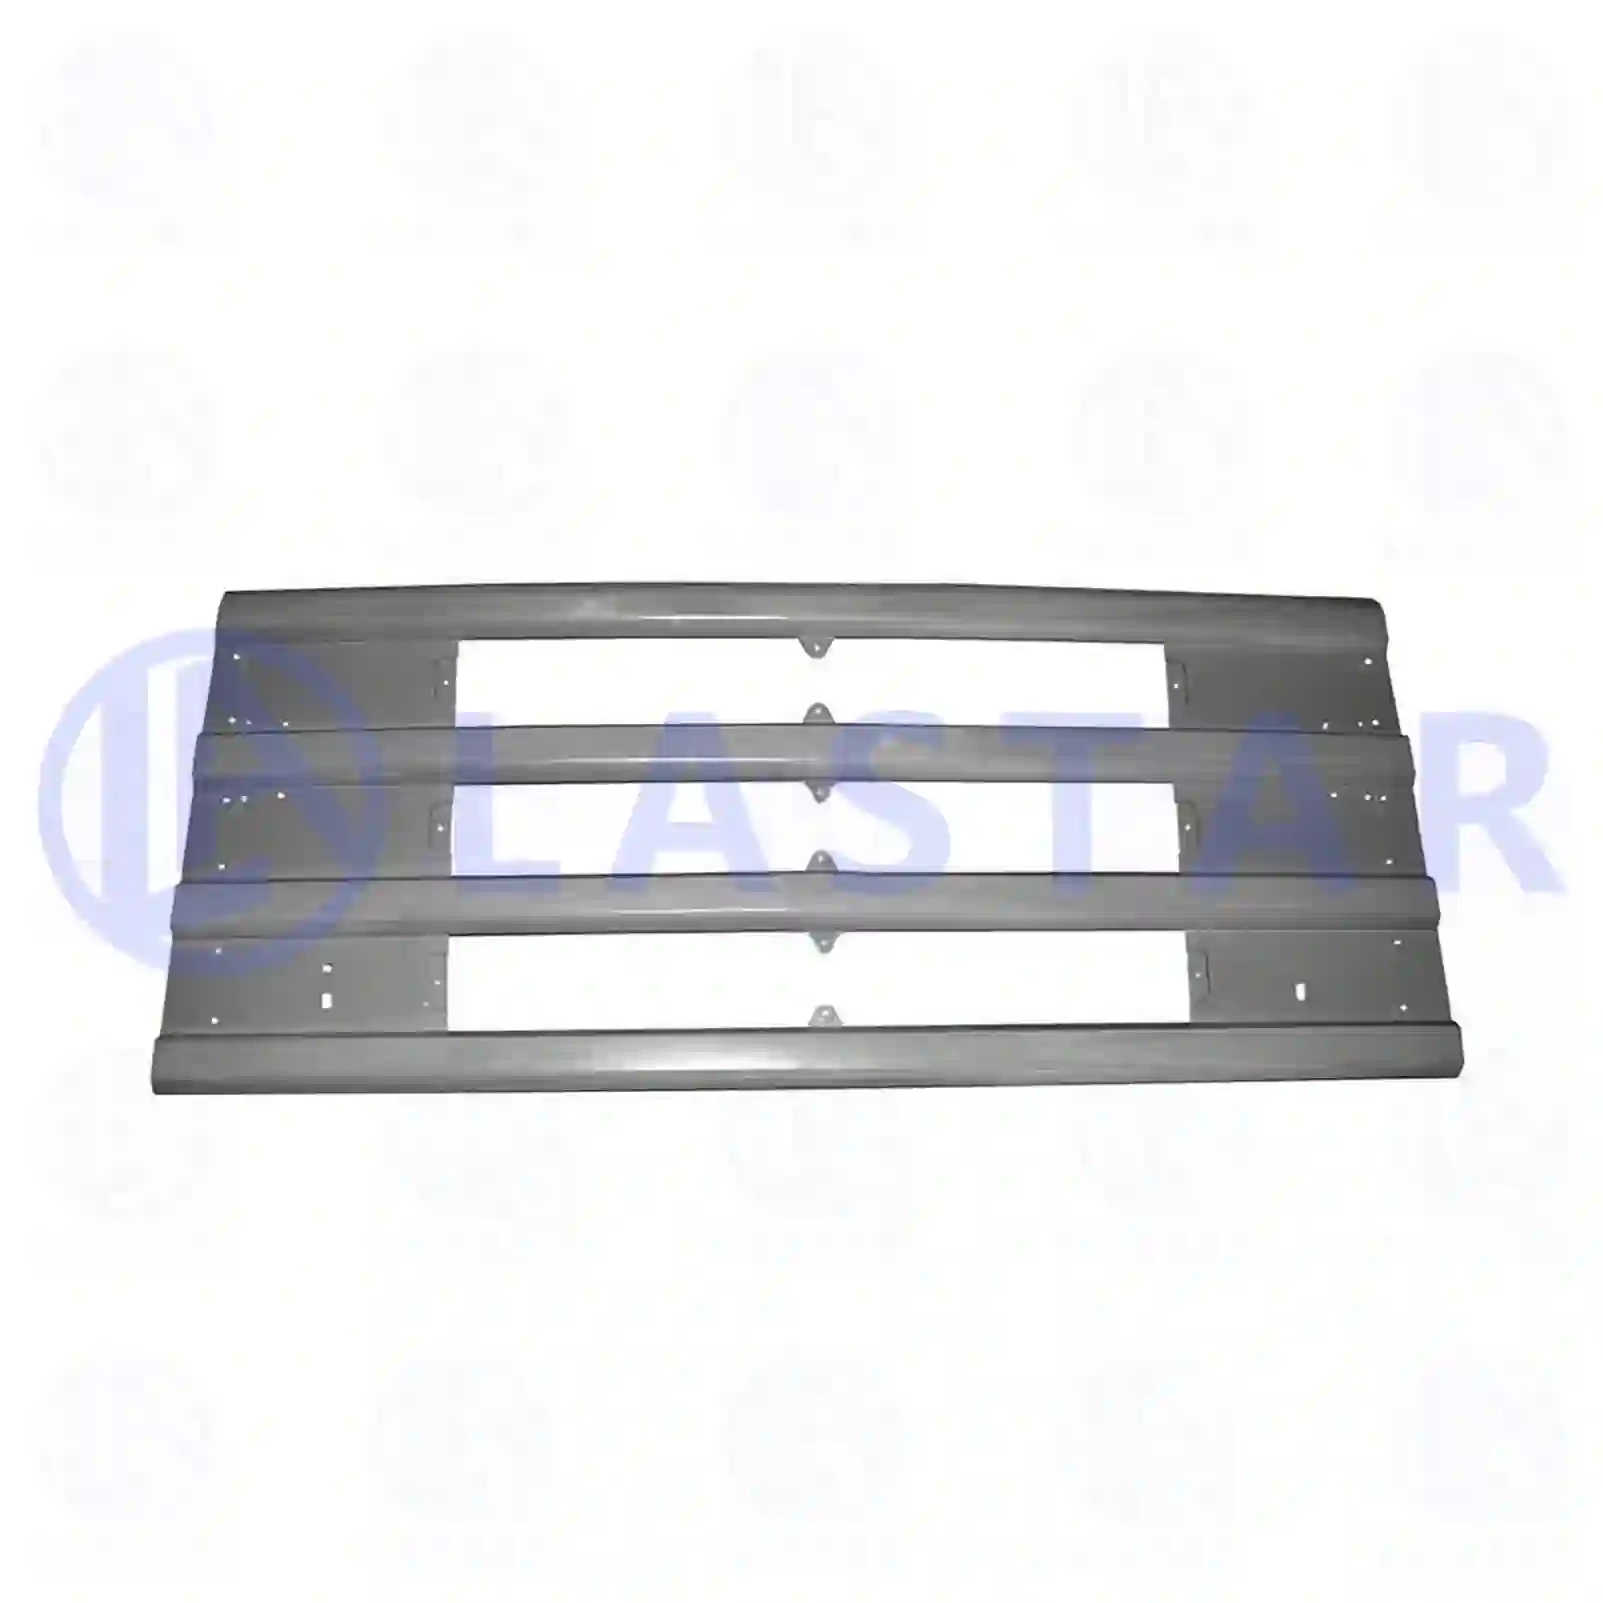 Front grill, upper, 77721459, 1371856, 1397570, ZG60812-0008 ||  77721459 Lastar Spare Part | Truck Spare Parts, Auotomotive Spare Parts Front grill, upper, 77721459, 1371856, 1397570, ZG60812-0008 ||  77721459 Lastar Spare Part | Truck Spare Parts, Auotomotive Spare Parts